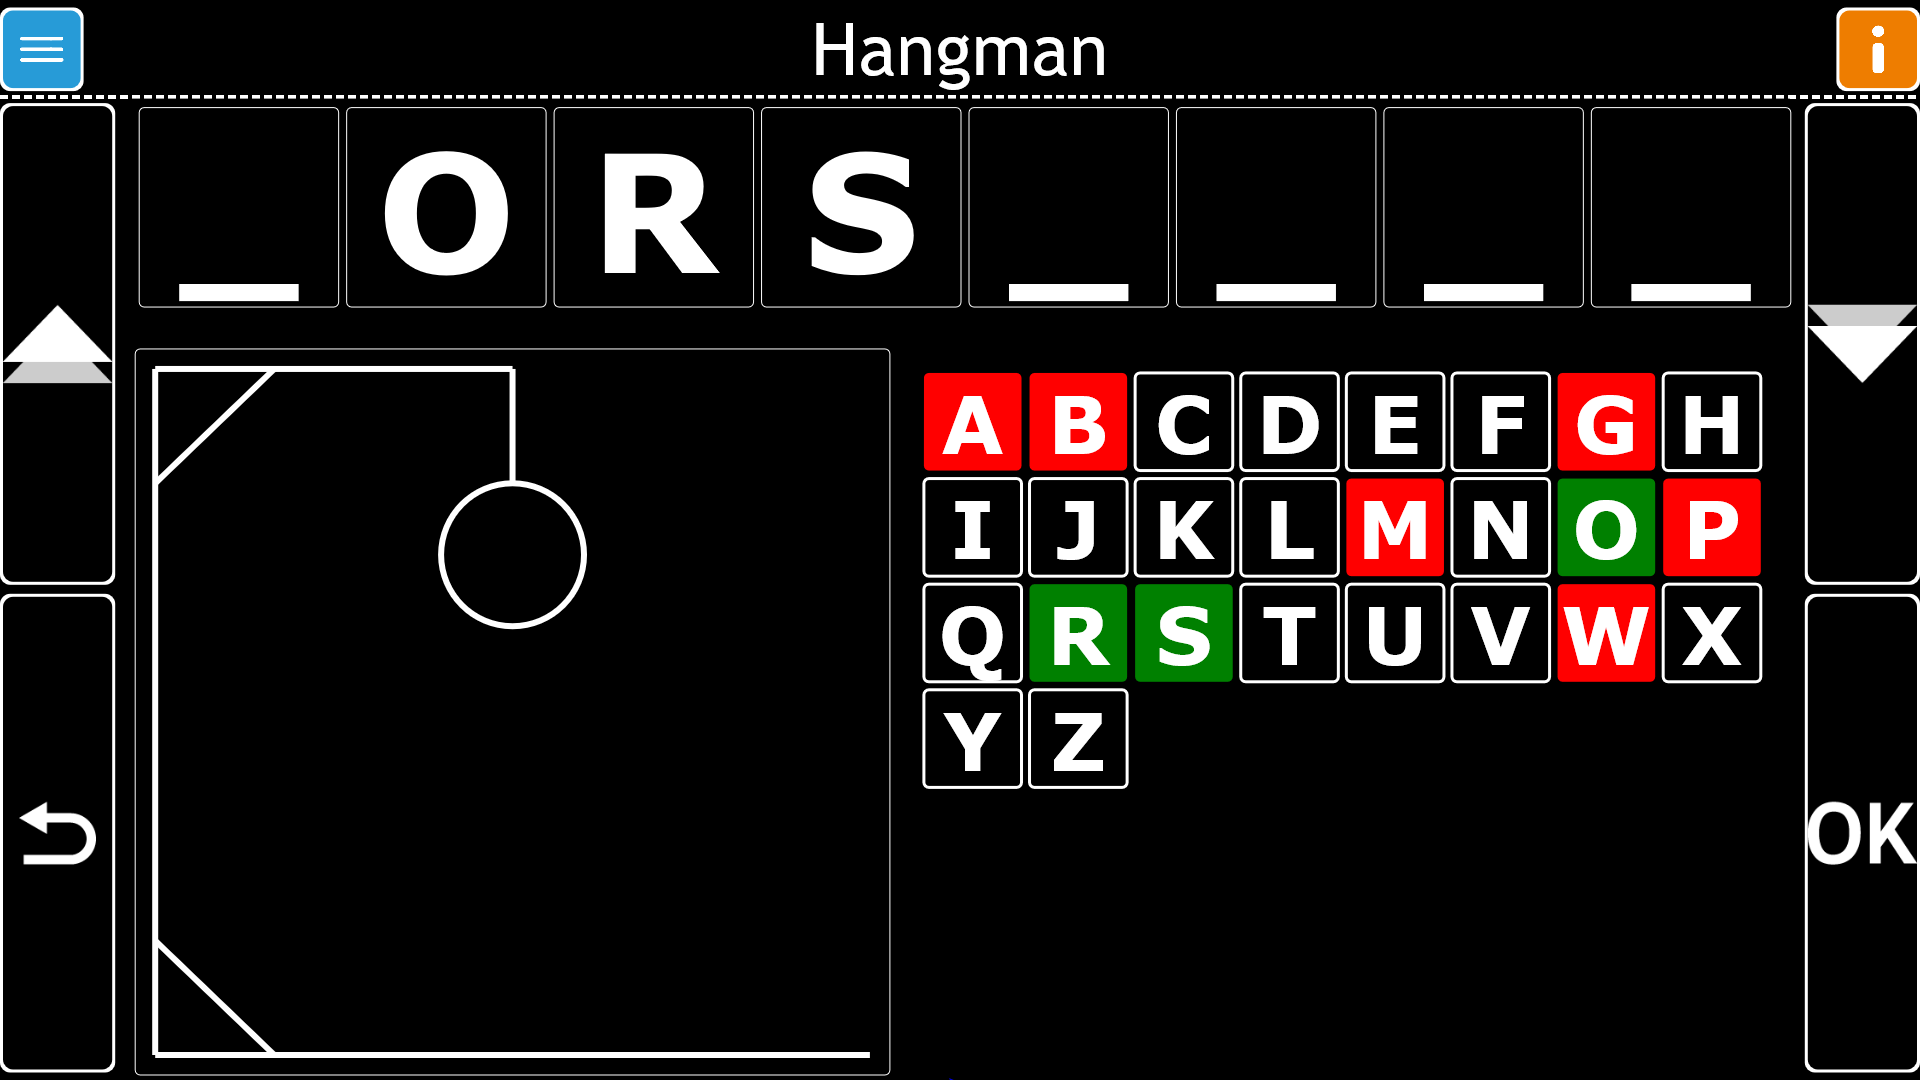 Image of a game of Hangman being played in GuideConnect